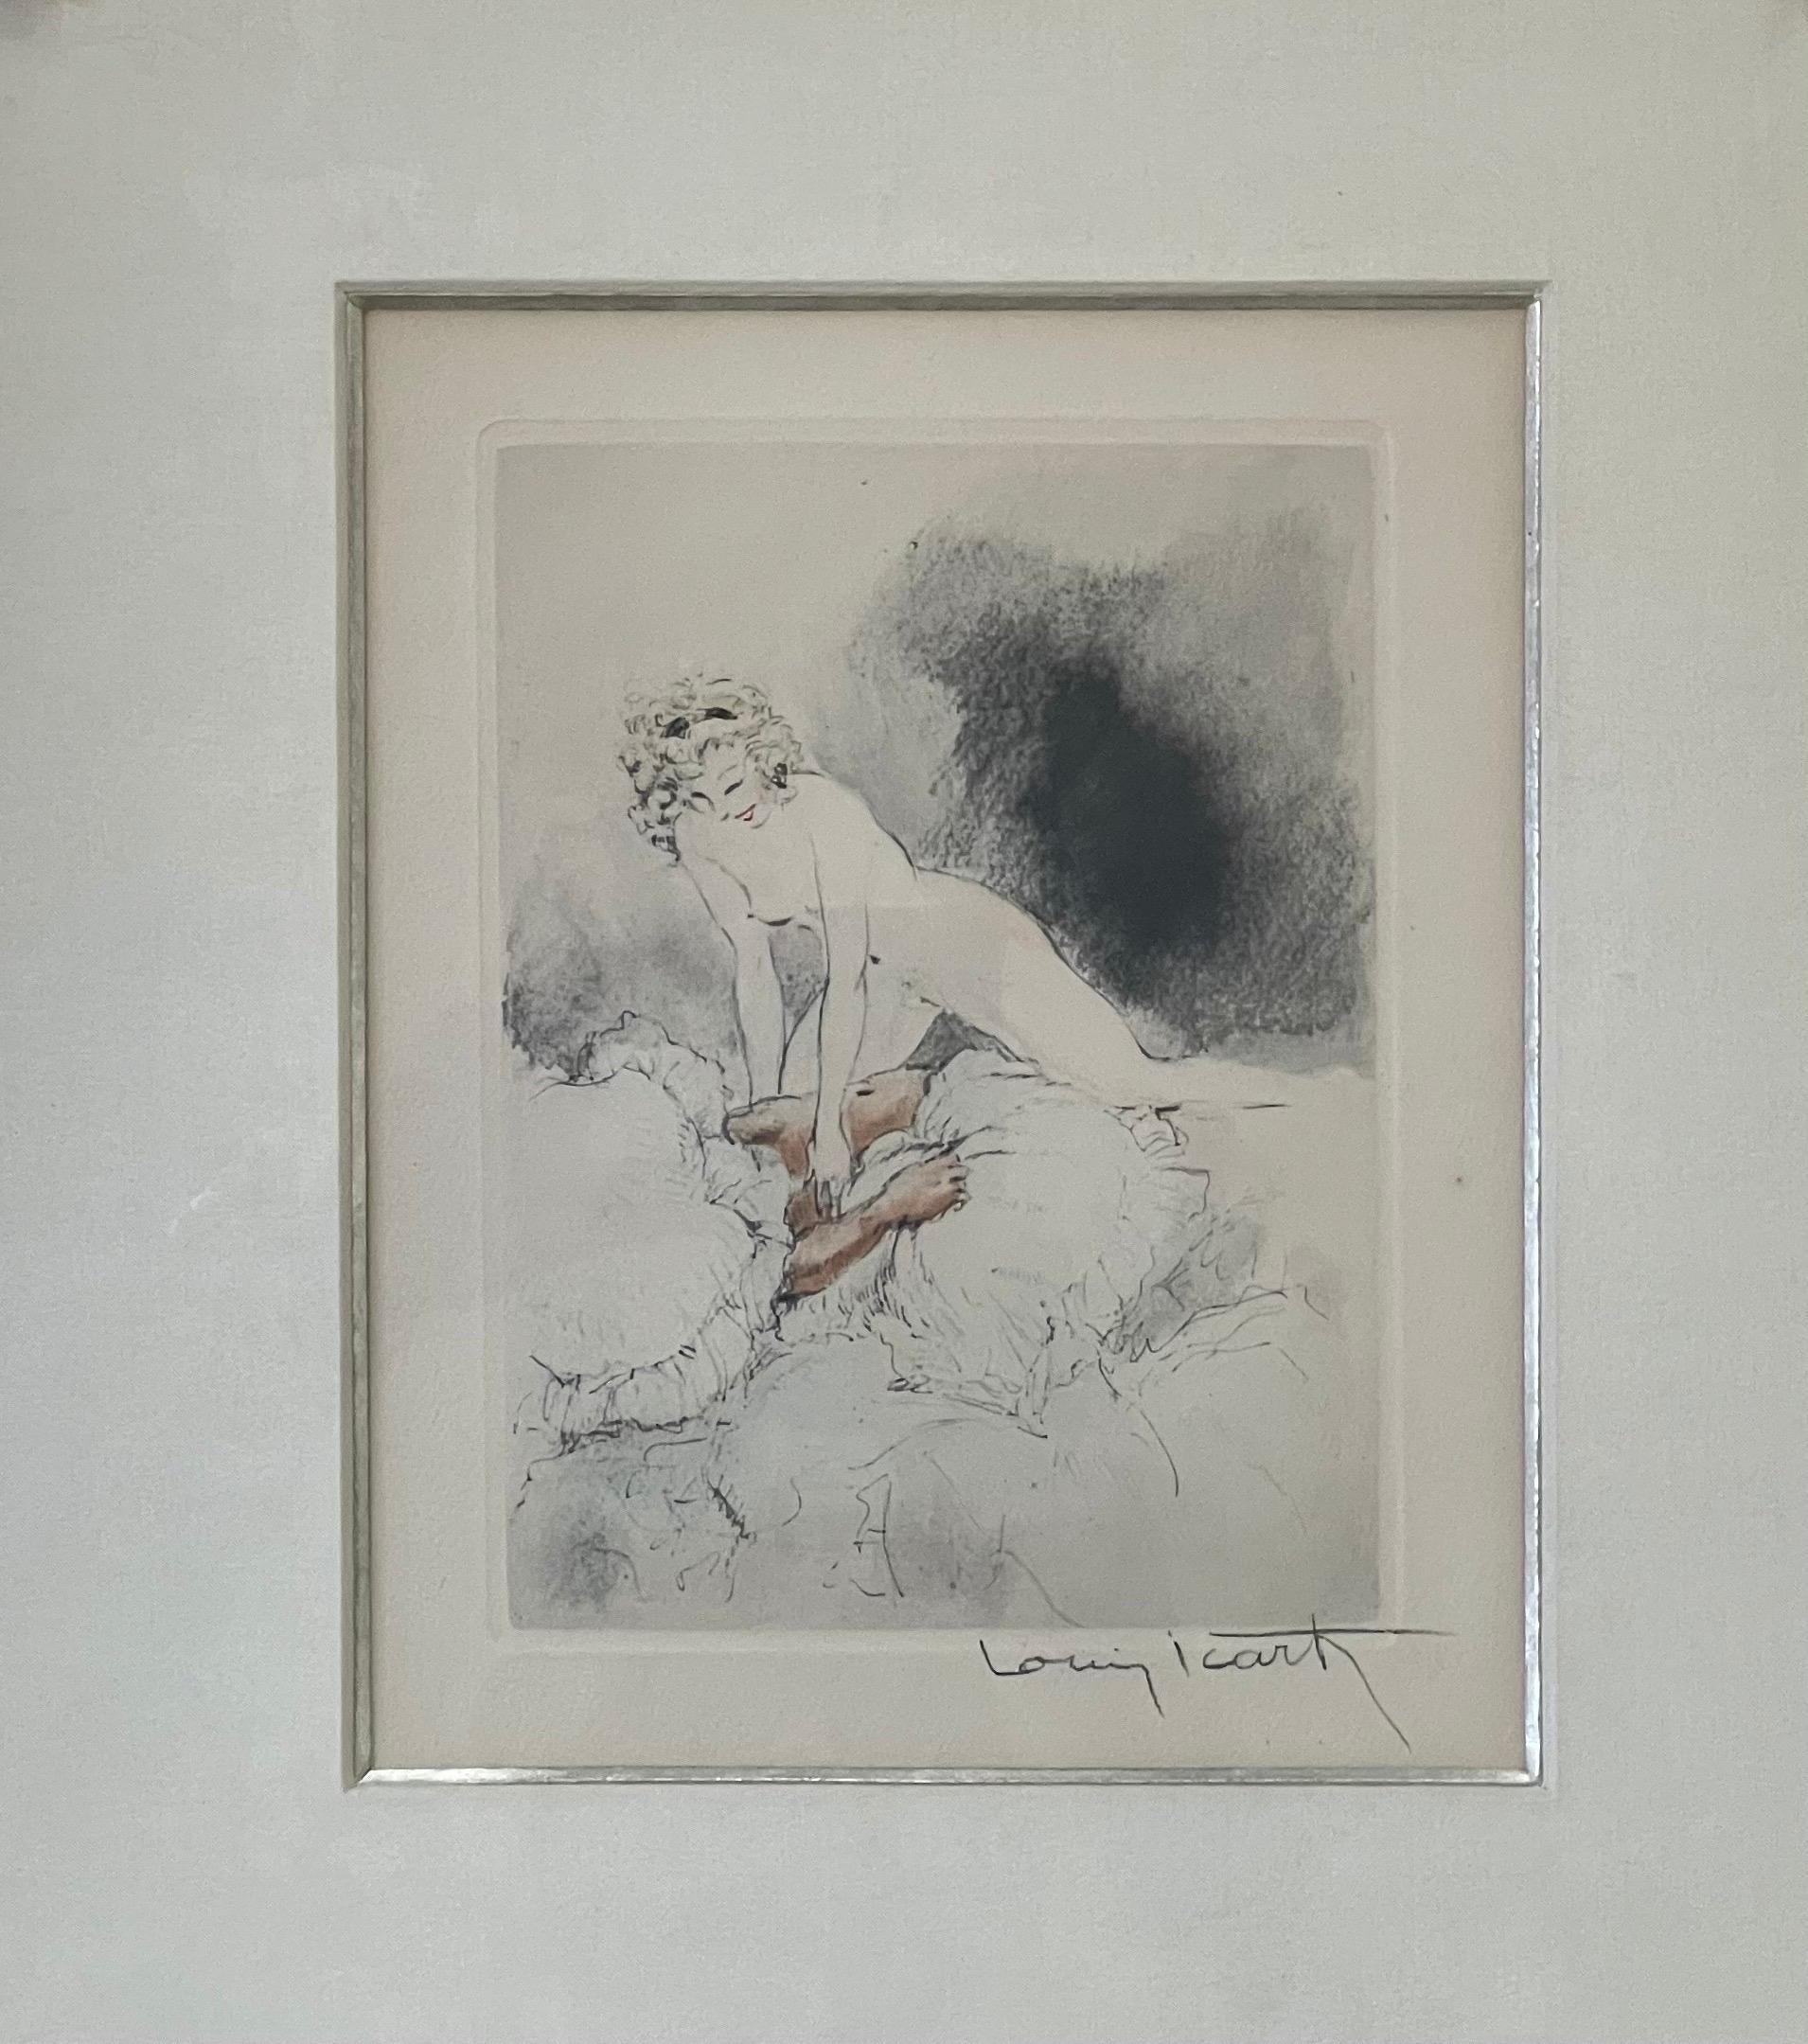 American Erotica Etching by Louis Icart from the 